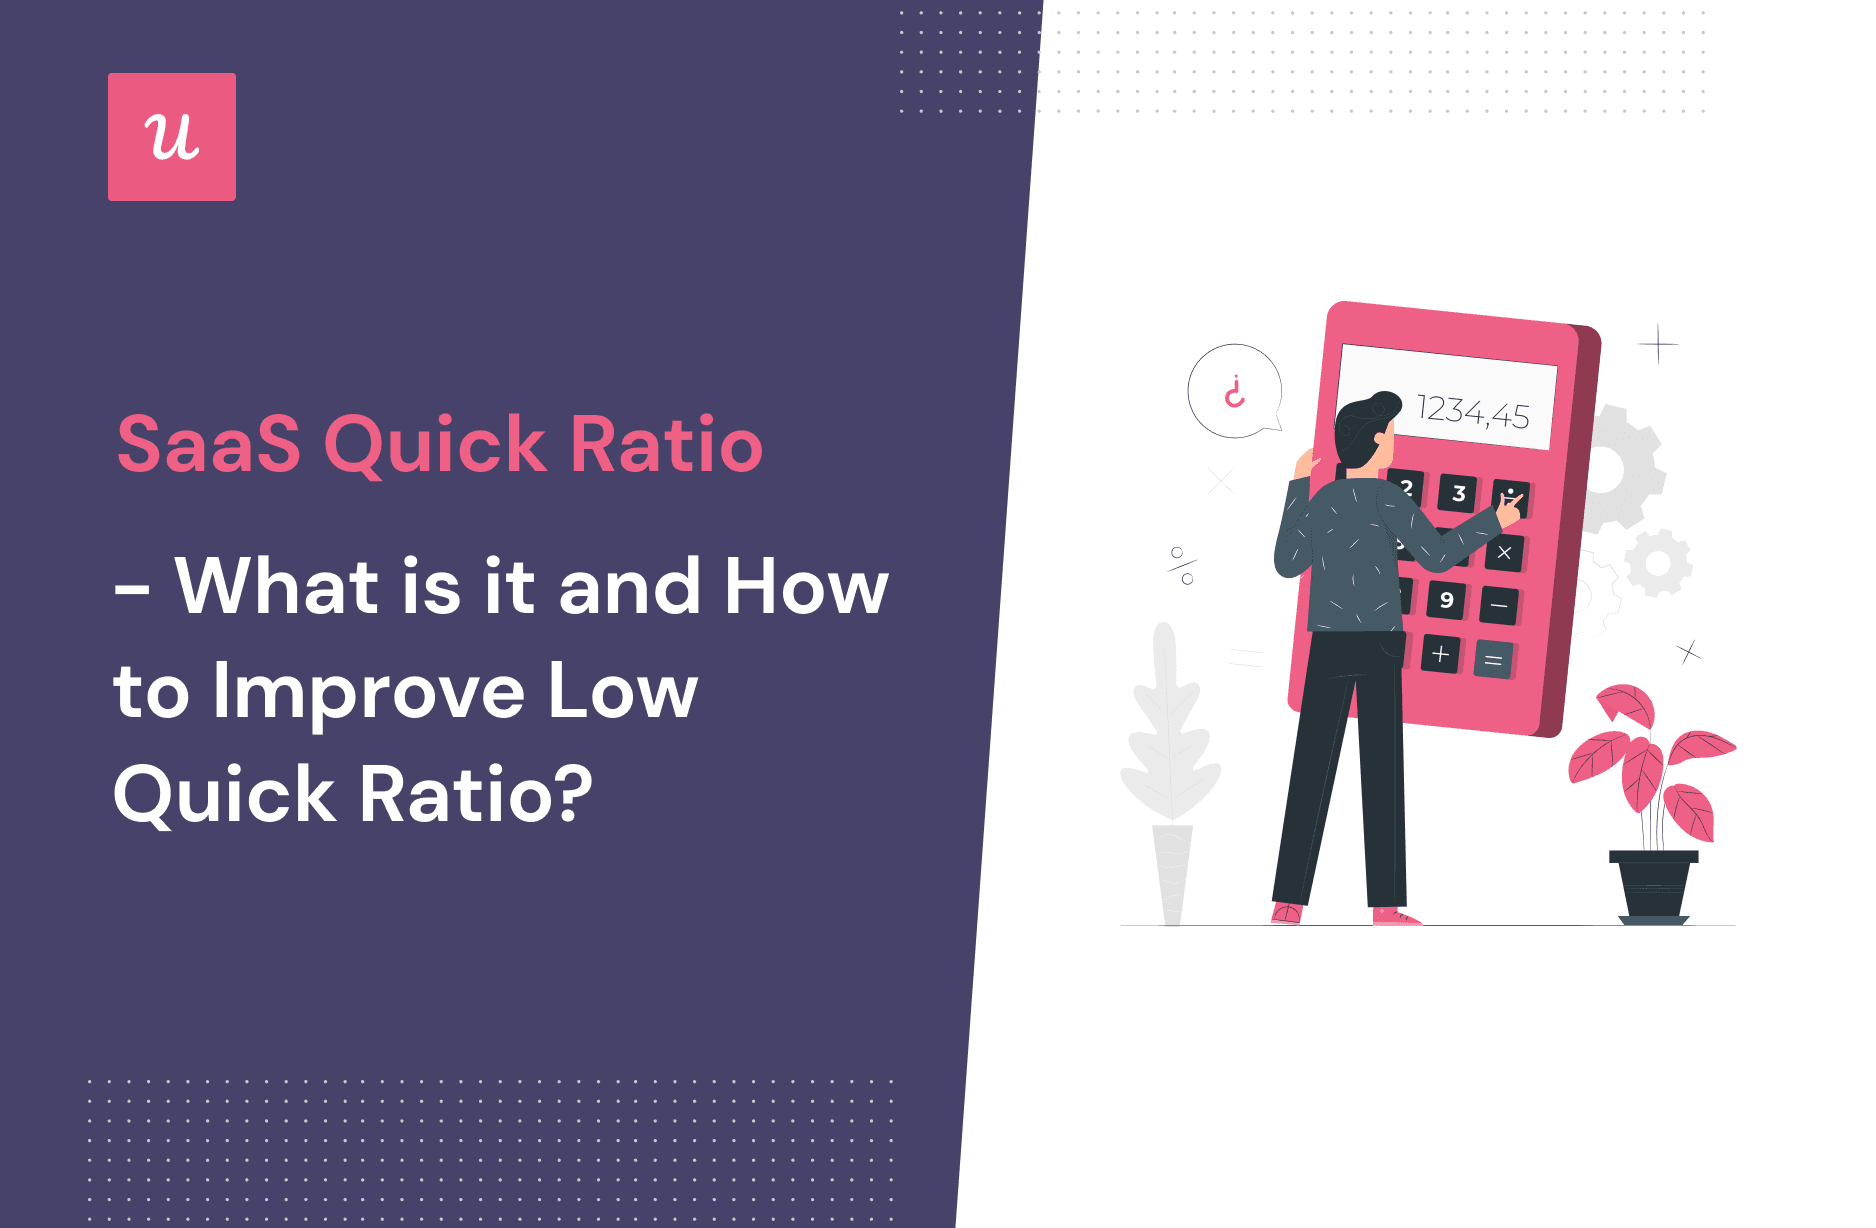 SaaS Quick Ratio - What is it and How To Improve Your Low Quick Ratio?